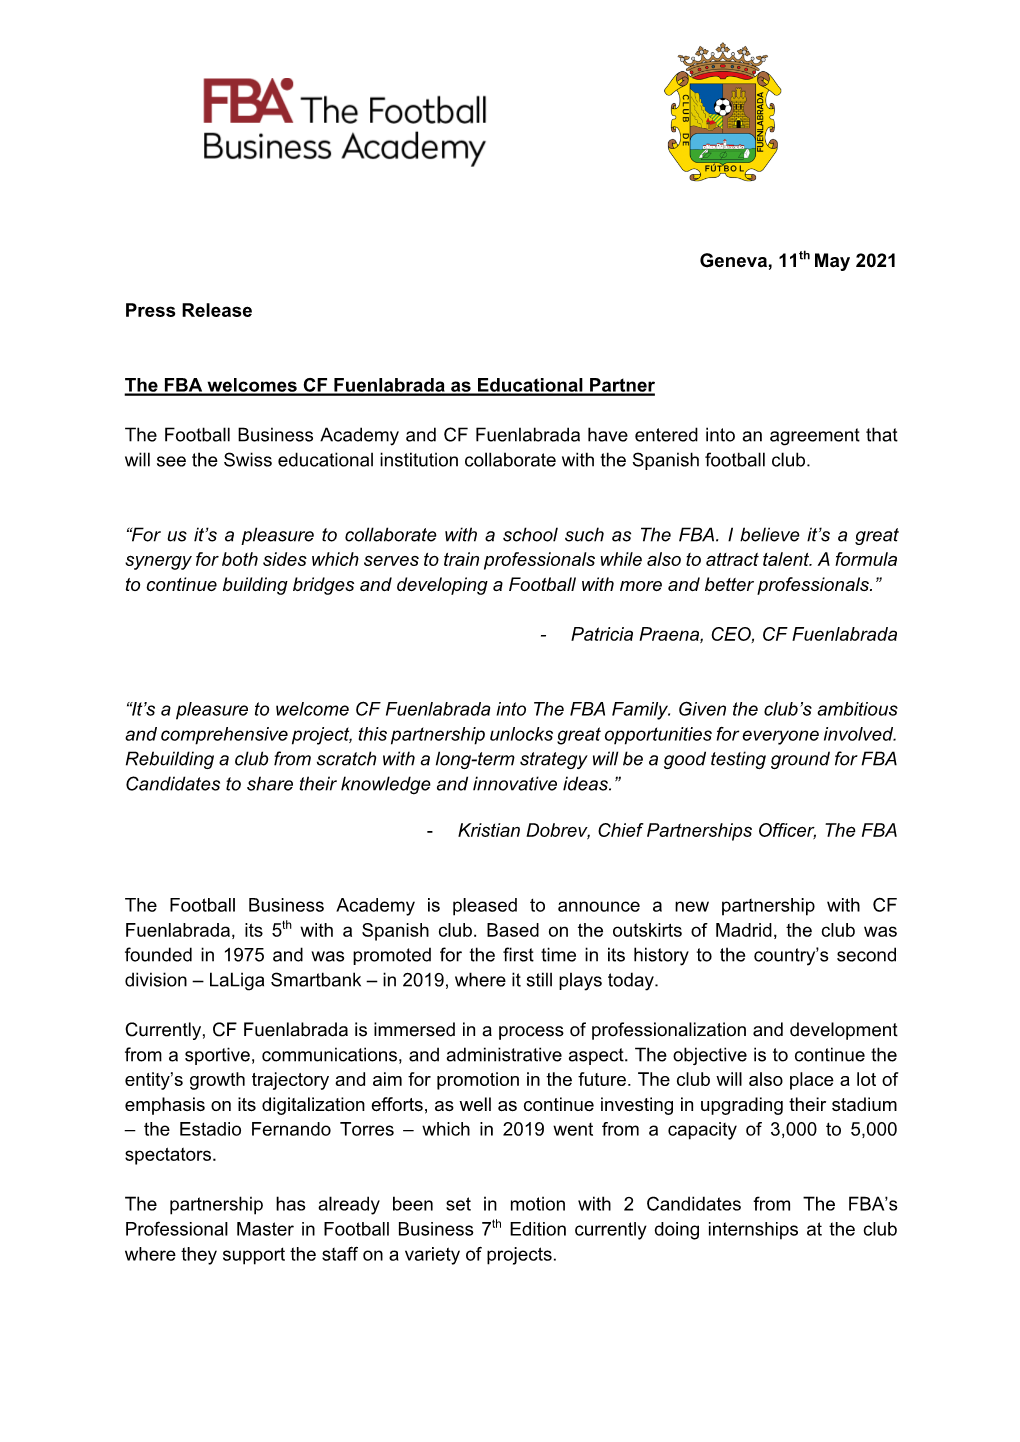 Geneva, 11Th May 2021 Press Release the FBA Welcomes CF